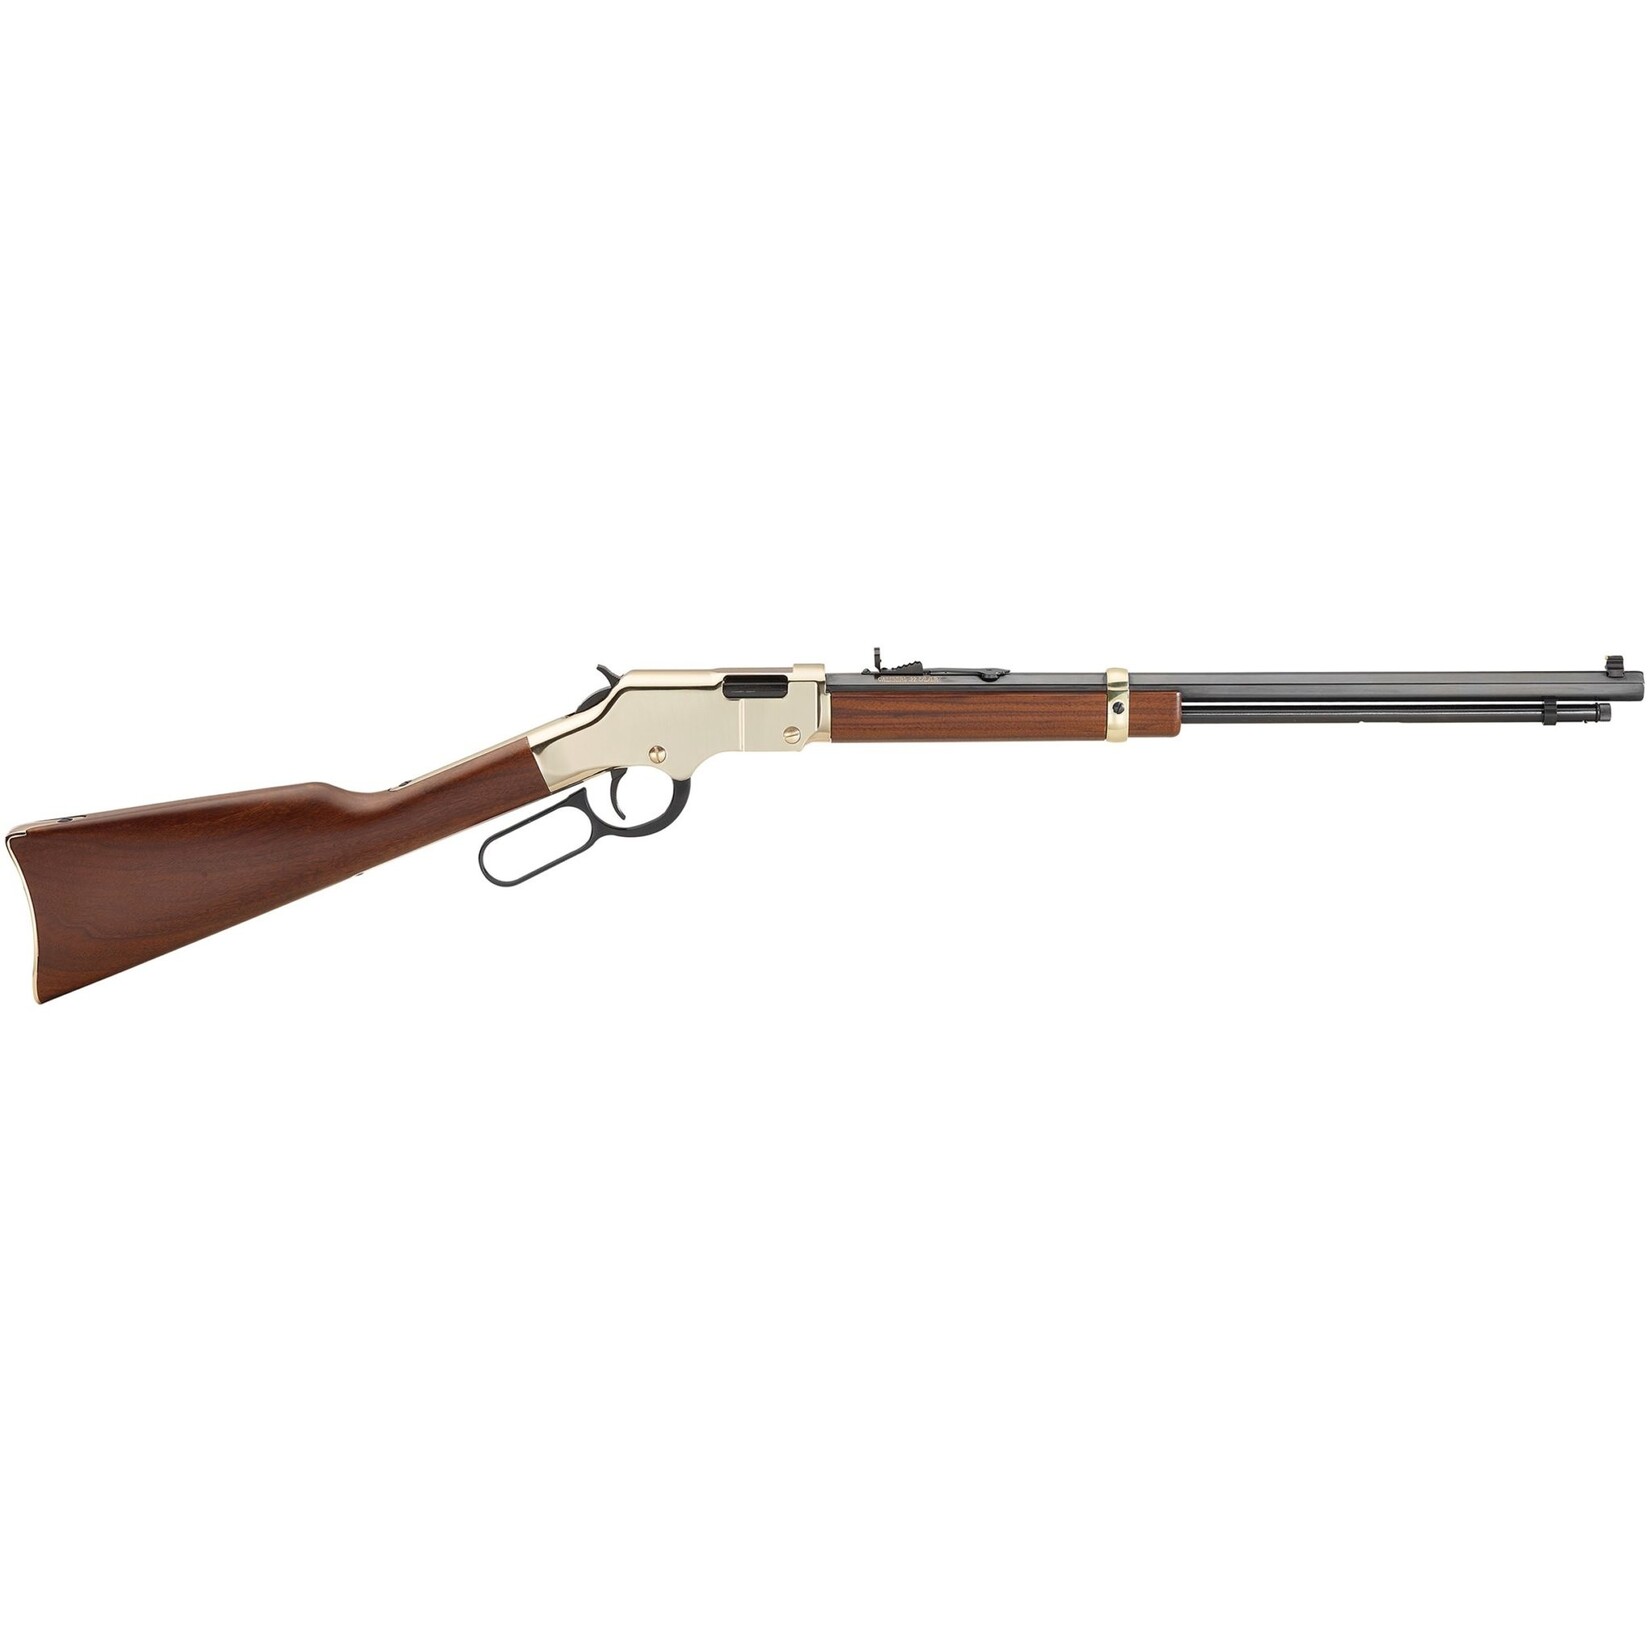 Henry Repeating Arms Co. Henry H004 Golden Boy Lever Rifle, 20 in, Blued, Wood Stk, 16+1 Rnd, 22 Short, 22 Long, 22 LR